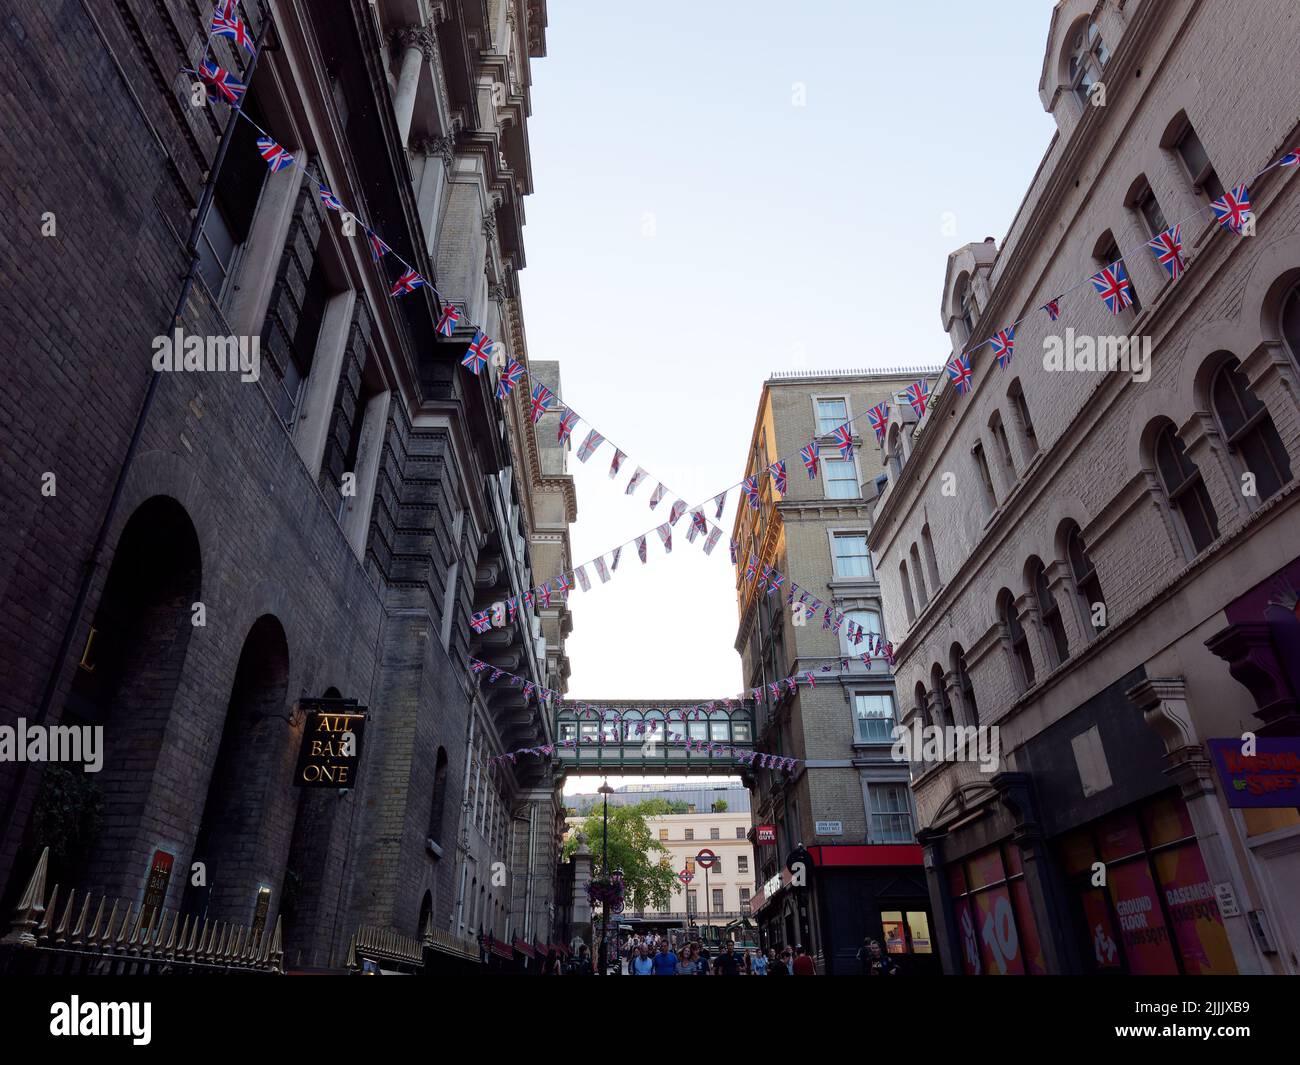 London, Greater London, England, June 22 2022: Villiers Street with bunting and an ornate bridge linking building, Stock Photo